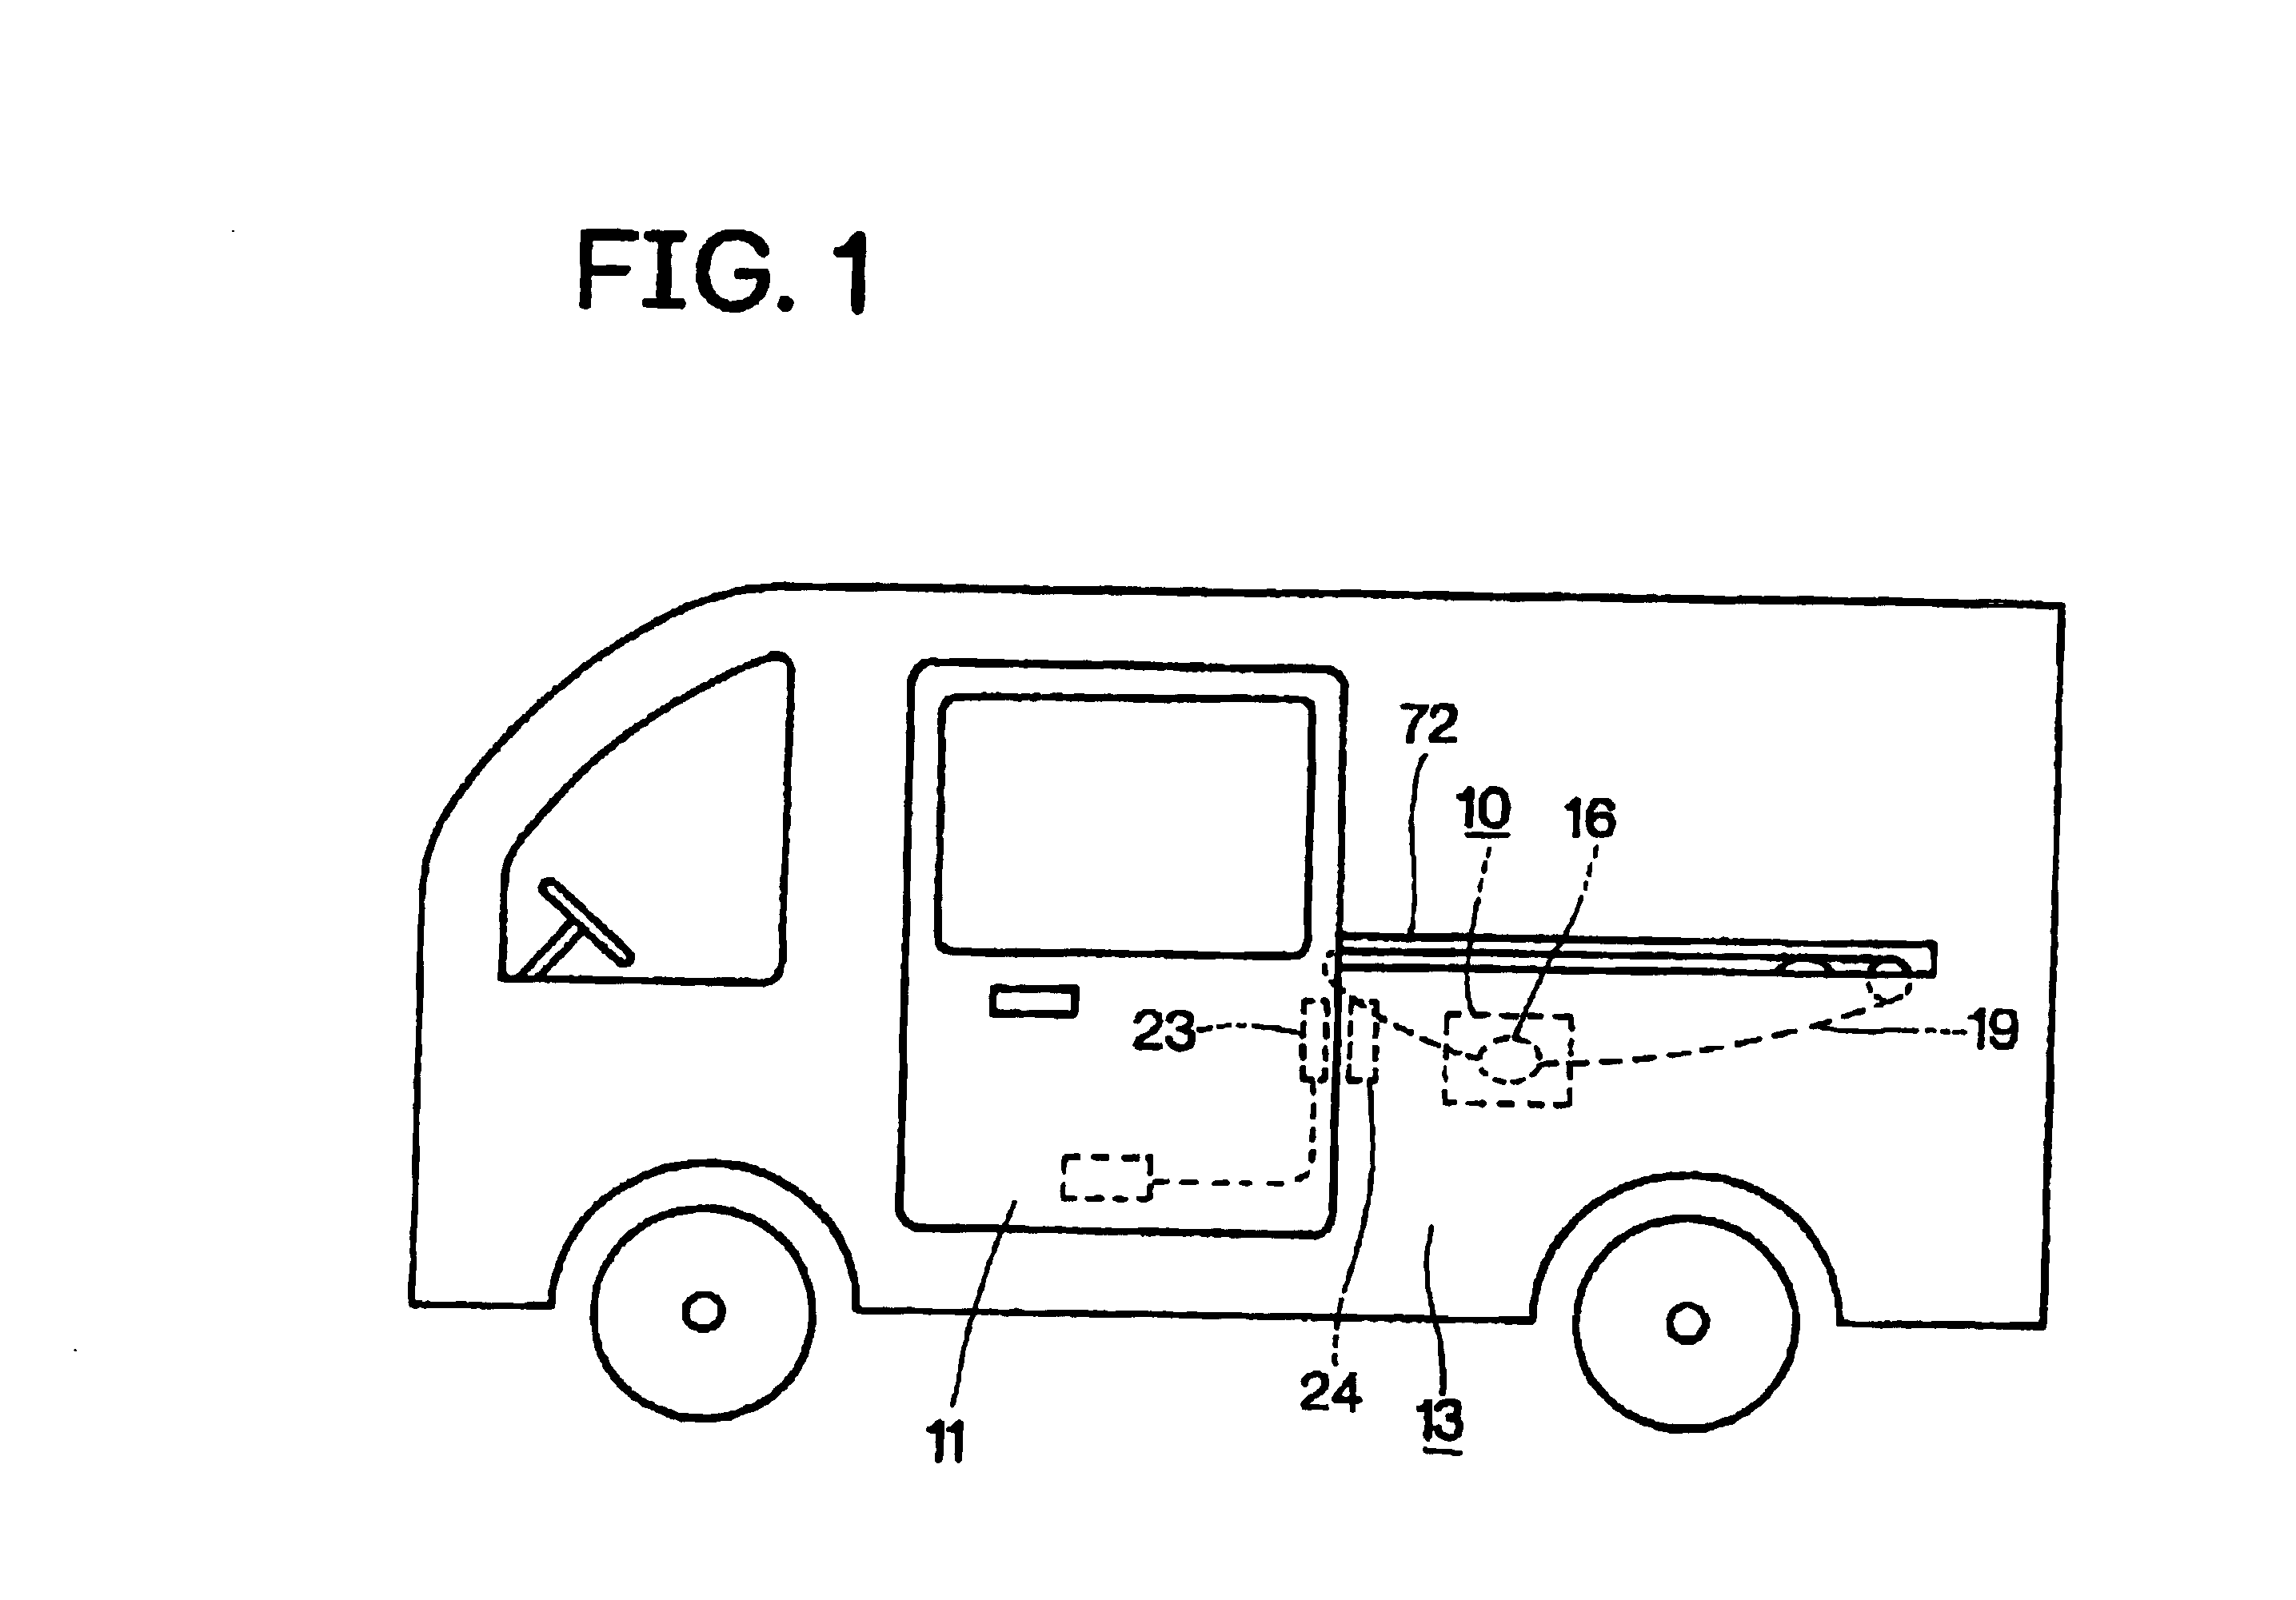 Control method of sliding a vehicle door by a powered sliding device